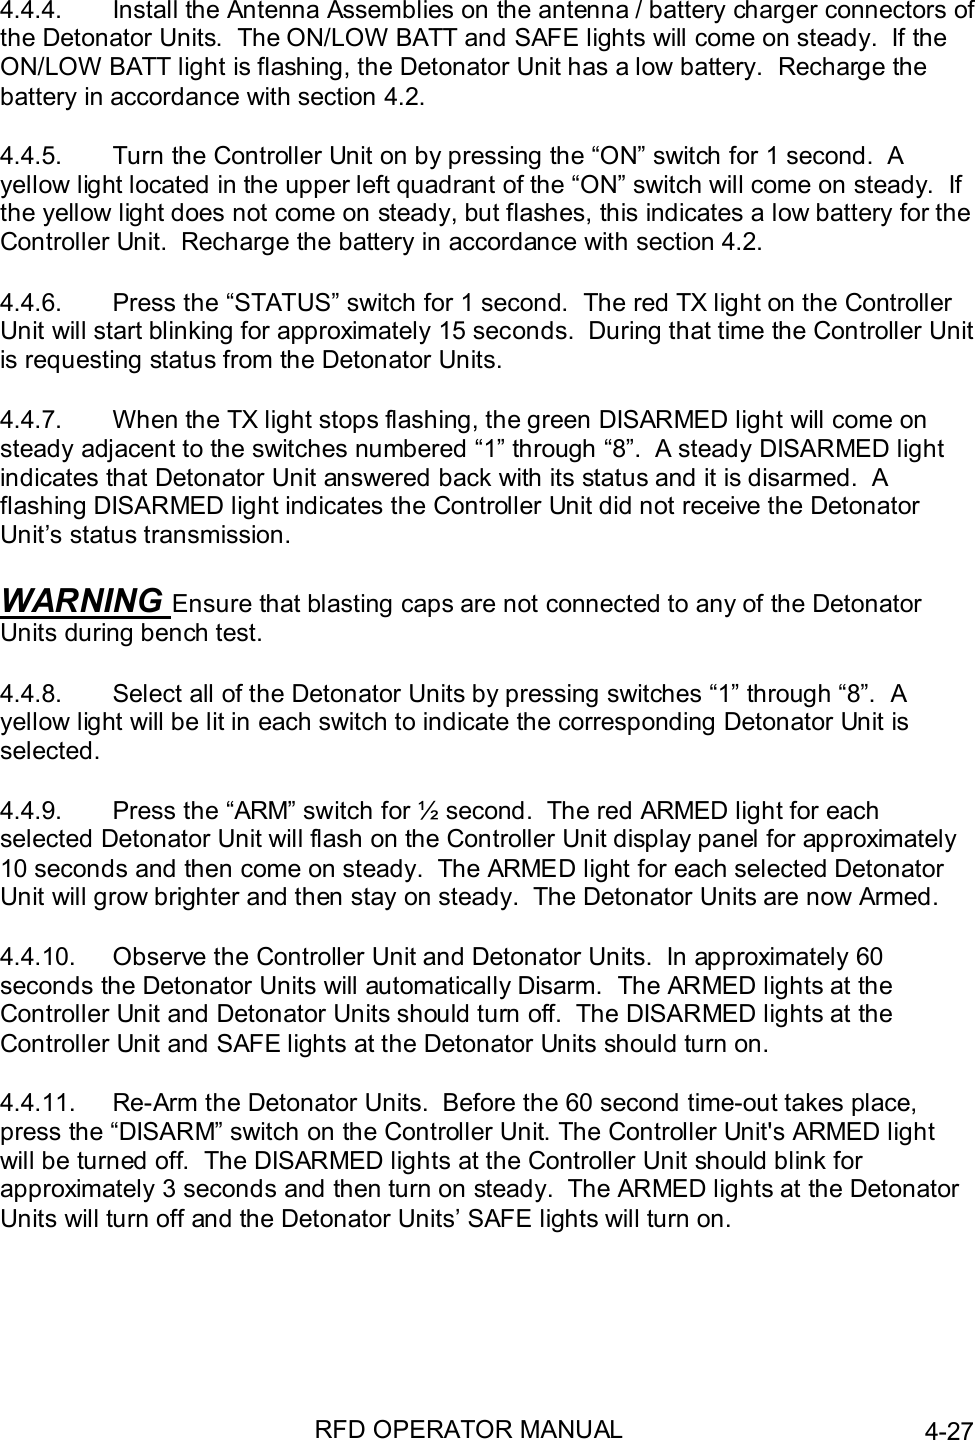 RFD OPERATOR MANUAL 4-274.4.4.  Install the Antenna Assemblies on the antenna / battery charger connectors ofthe Detonator Units.  The ON/LOW BATT and SAFE lights will come on steady.  If theON/LOW BATT light is flashing, the Detonator Unit has a low battery.  Recharge thebattery in accordance with section 4.2.4.4.5.  Turn the Controller Unit on by pressing the “ON” switch for 1 second.  Ayellow light located in the upper left quadrant of the “ON” switch will come on steady.  Ifthe yellow light does not come on steady, but flashes, this indicates a low battery for theController Unit.  Recharge the battery in accordance with section 4.2.4.4.6.  Press the “STATUS” switch for 1 second.  The red TX light on the ControllerUnit will start blinking for approximately 15 seconds.  During that time the Controller Unitis requesting status from the Detonator Units.4.4.7.  When the TX light stops flashing, the green DISARMED light will come onsteady adjacent to the switches numbered “1” through “8”.  A steady DISARMED lightindicates that Detonator Unit answered back with its status and it is disarmed.  Aflashing DISARMED light indicates the Controller Unit did not receive the DetonatorUnit’s status transmission.WARNING Ensure that blasting caps are not connected to any of the DetonatorUnits during bench test.4.4.8.  Select all of the Detonator Units by pressing switches “1” through “8”.  Ayellow light will be lit in each switch to indicate the corresponding Detonator Unit isselected.4.4.9.  Press the “ARM” switch for ½ second.  The red ARMED light for eachselected Detonator Unit will flash on the Controller Unit display panel for approximately10 seconds and then come on steady.  The ARMED light for each selected DetonatorUnit will grow brighter and then stay on steady.  The Detonator Units are now Armed.4.4.10.  Observe the Controller Unit and Detonator Units.  In approximately 60seconds the Detonator Units will automatically Disarm.  The ARMED lights at theController Unit and Detonator Units should turn off.  The DISARMED lights at theController Unit and SAFE lights at the Detonator Units should turn on.4.4.11.  Re-Arm the Detonator Units.  Before the 60 second time-out takes place,press the “DISARM” switch on the Controller Unit. The Controller Unit&apos;s ARMED lightwill be turned off.  The DISARMED lights at the Controller Unit should blink forapproximately 3 seconds and then turn on steady.  The ARMED lights at the DetonatorUnits will turn off and the Detonator Units’ SAFE lights will turn on.